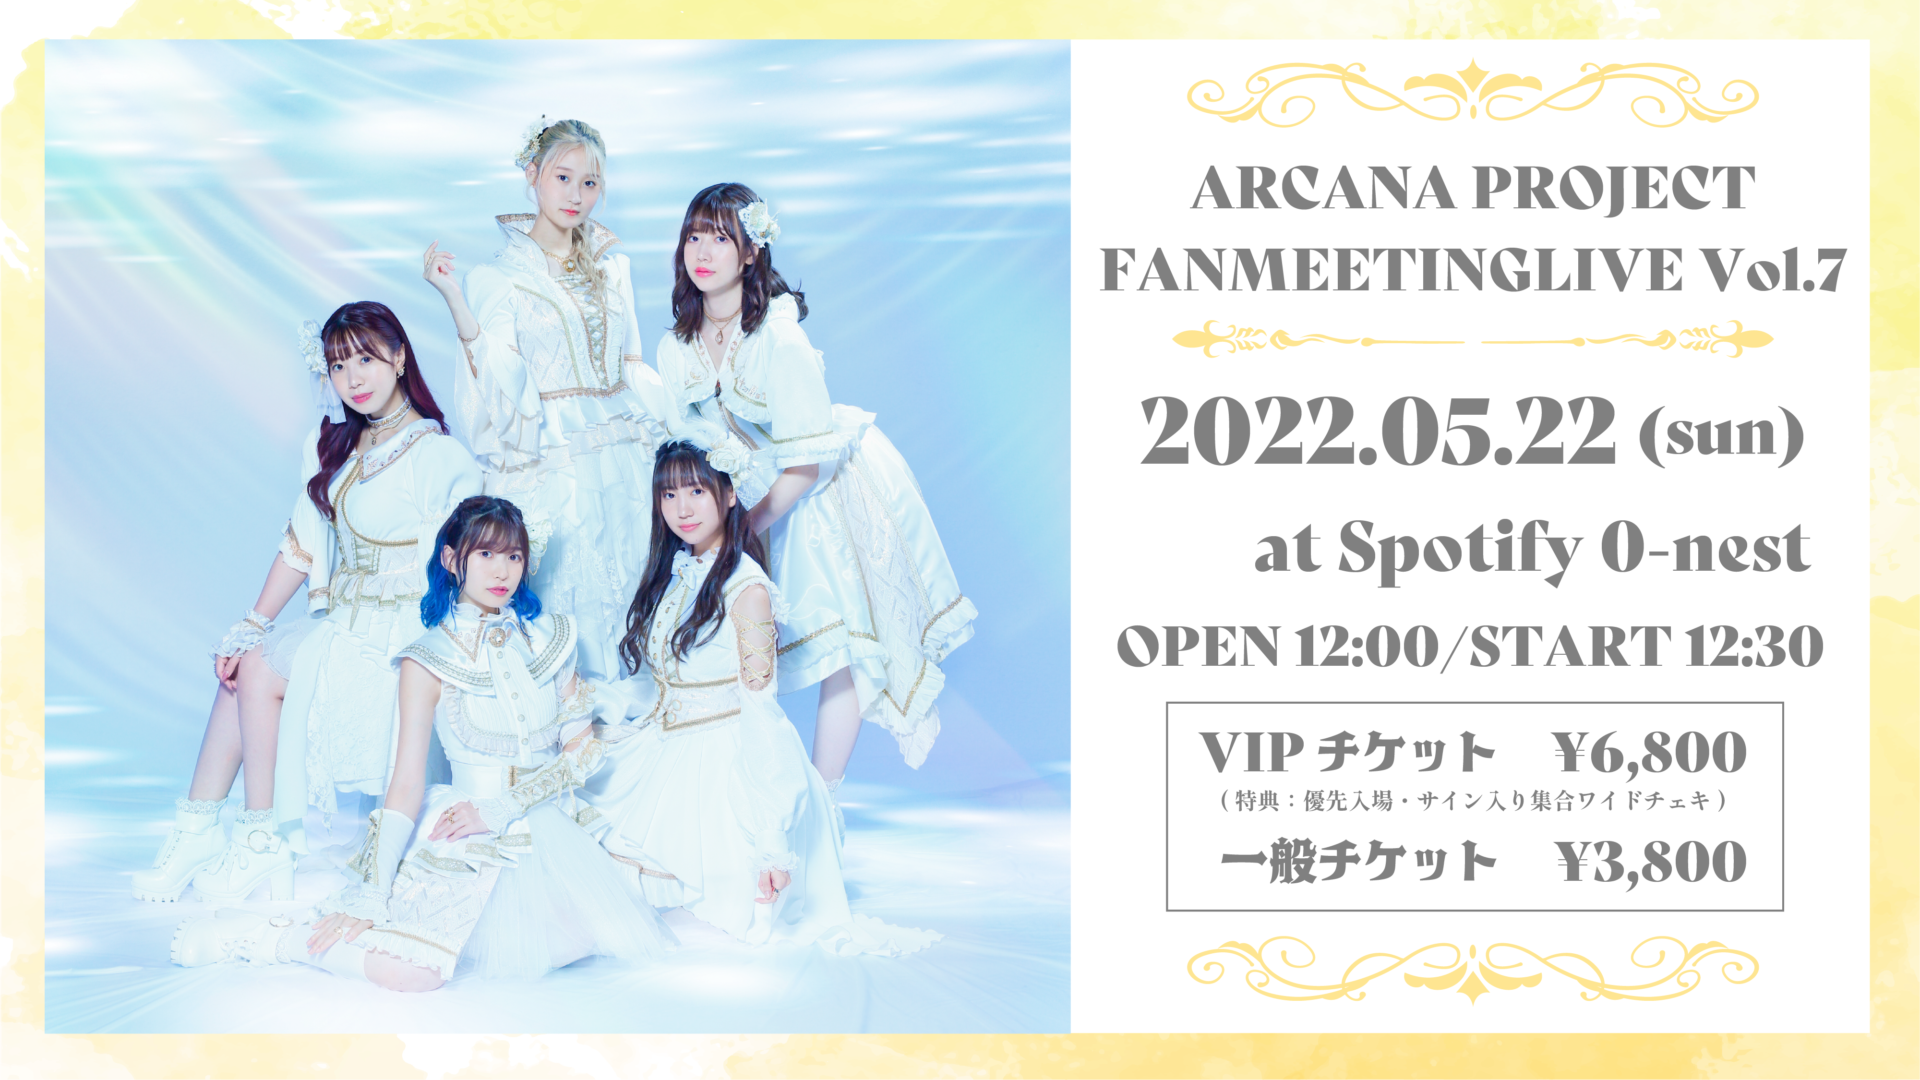 ARCANA PROJECT FANMEETING LIVE Vol.7